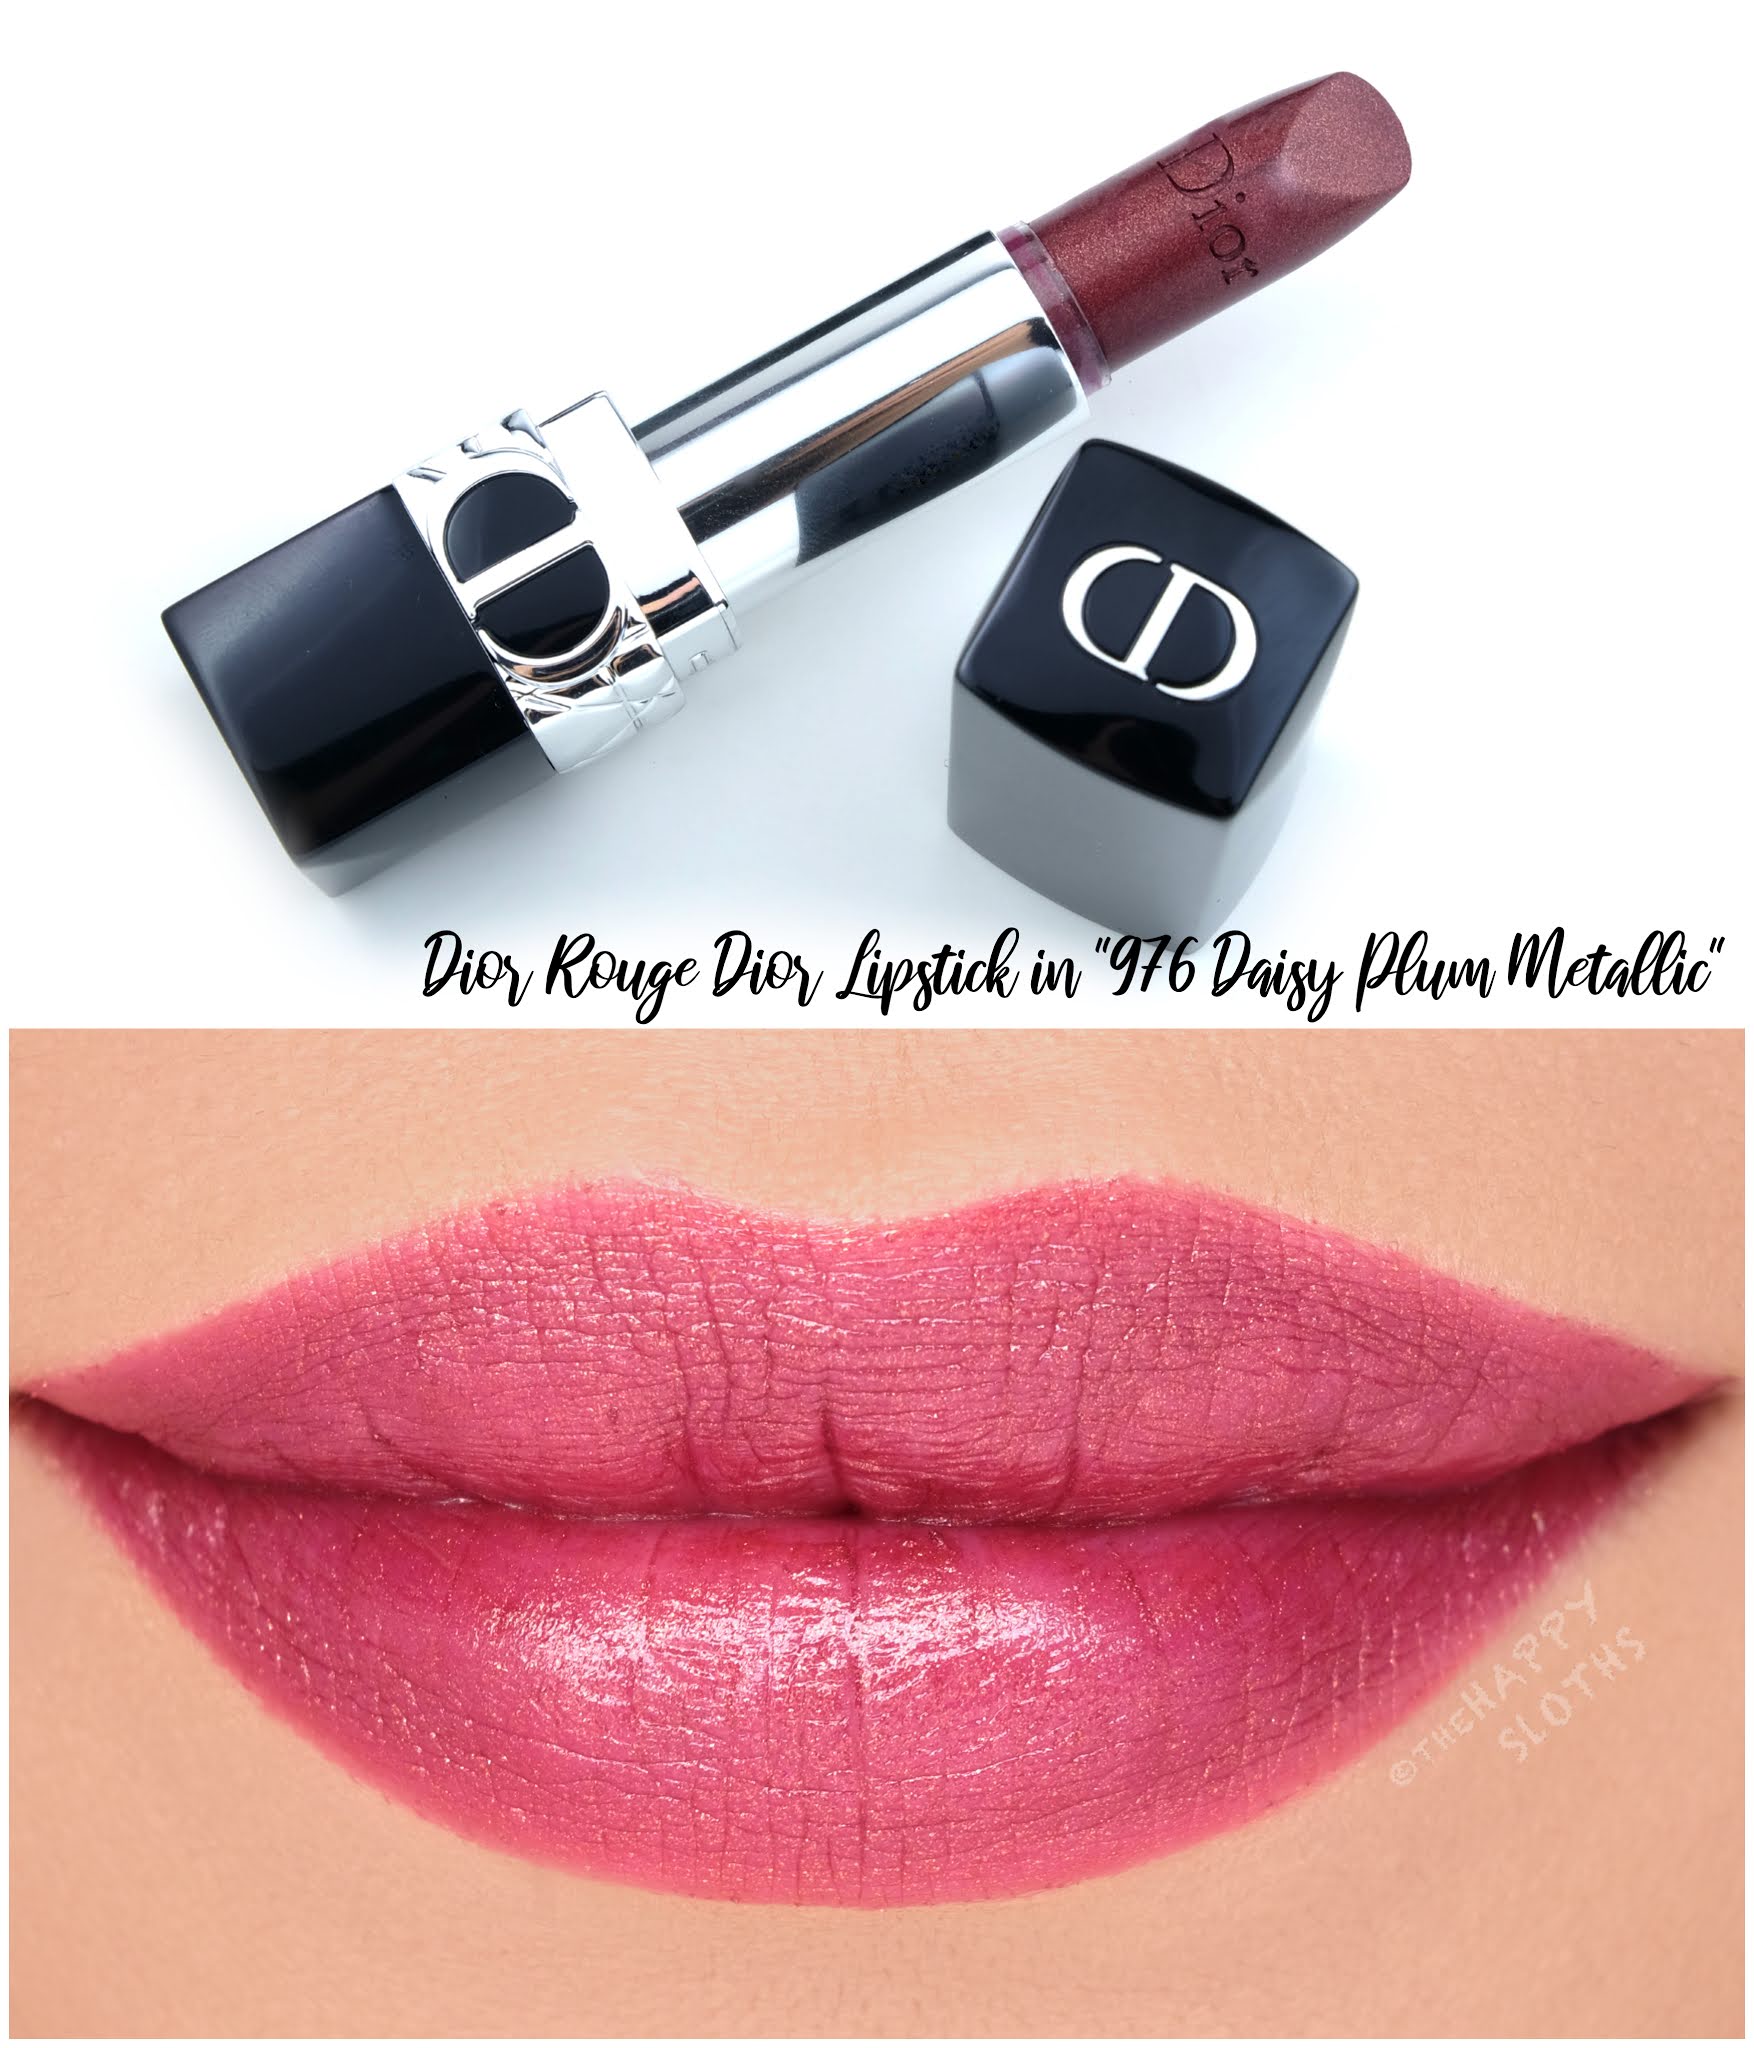 Dior | *NEW* Rouge Dior Refillable Lipstick in 976 Daisy Plum Metallic: Review and Swatches